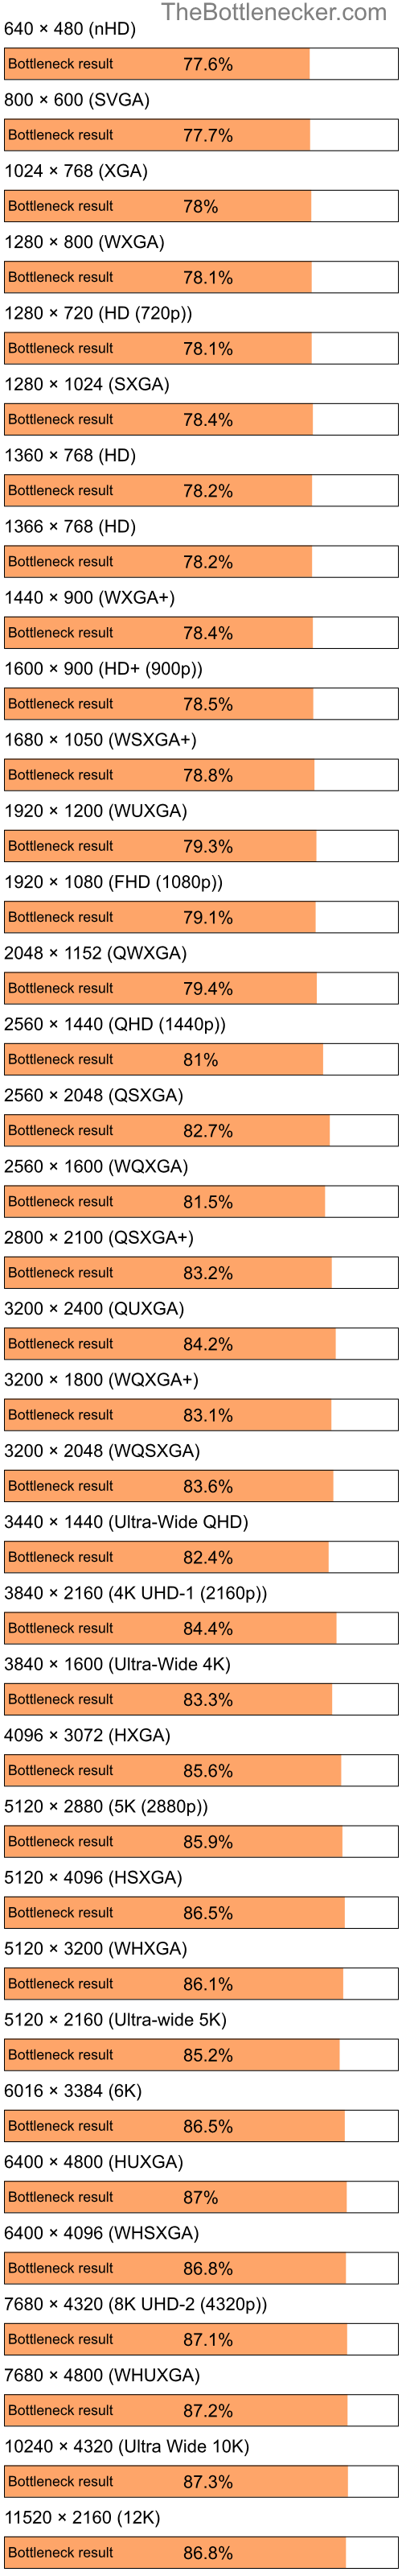 Bottleneck results by resolution for Intel Celeron and NVIDIA GeForce 7100 GS in Graphic Card Intense Tasks